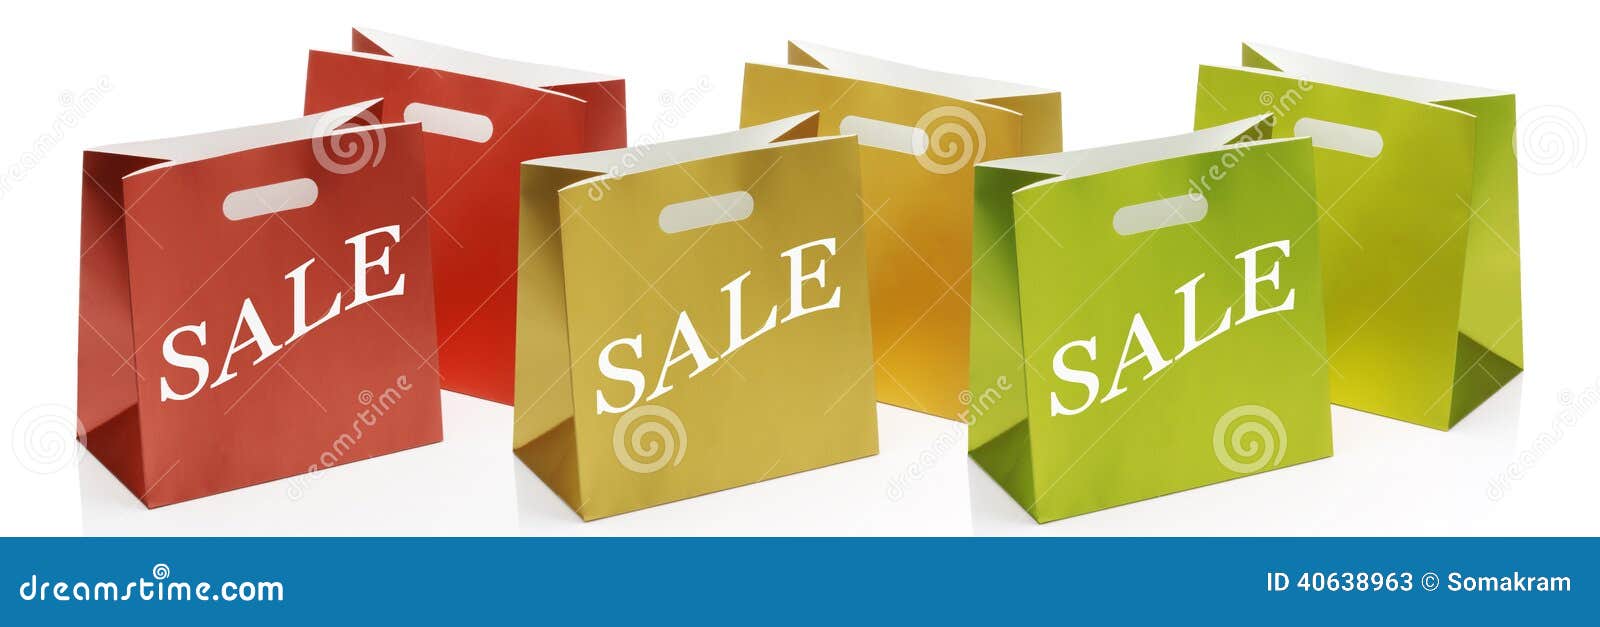 sale shopping bags